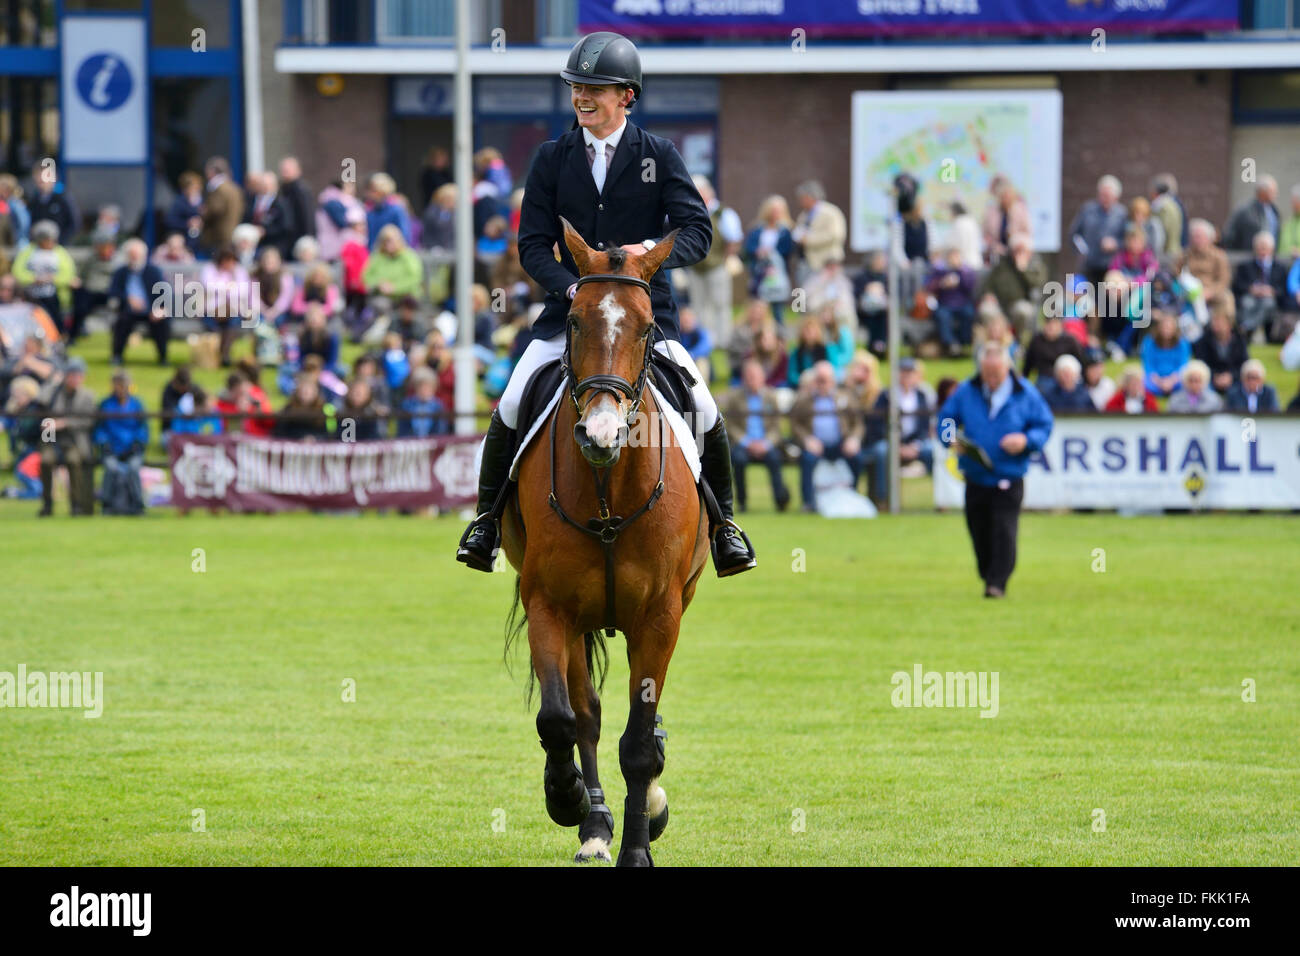 Show Jumping at Royal Highland Show 2015, Ingliston, Édimbourg, Écosse, Royaume-Uni Banque D'Images